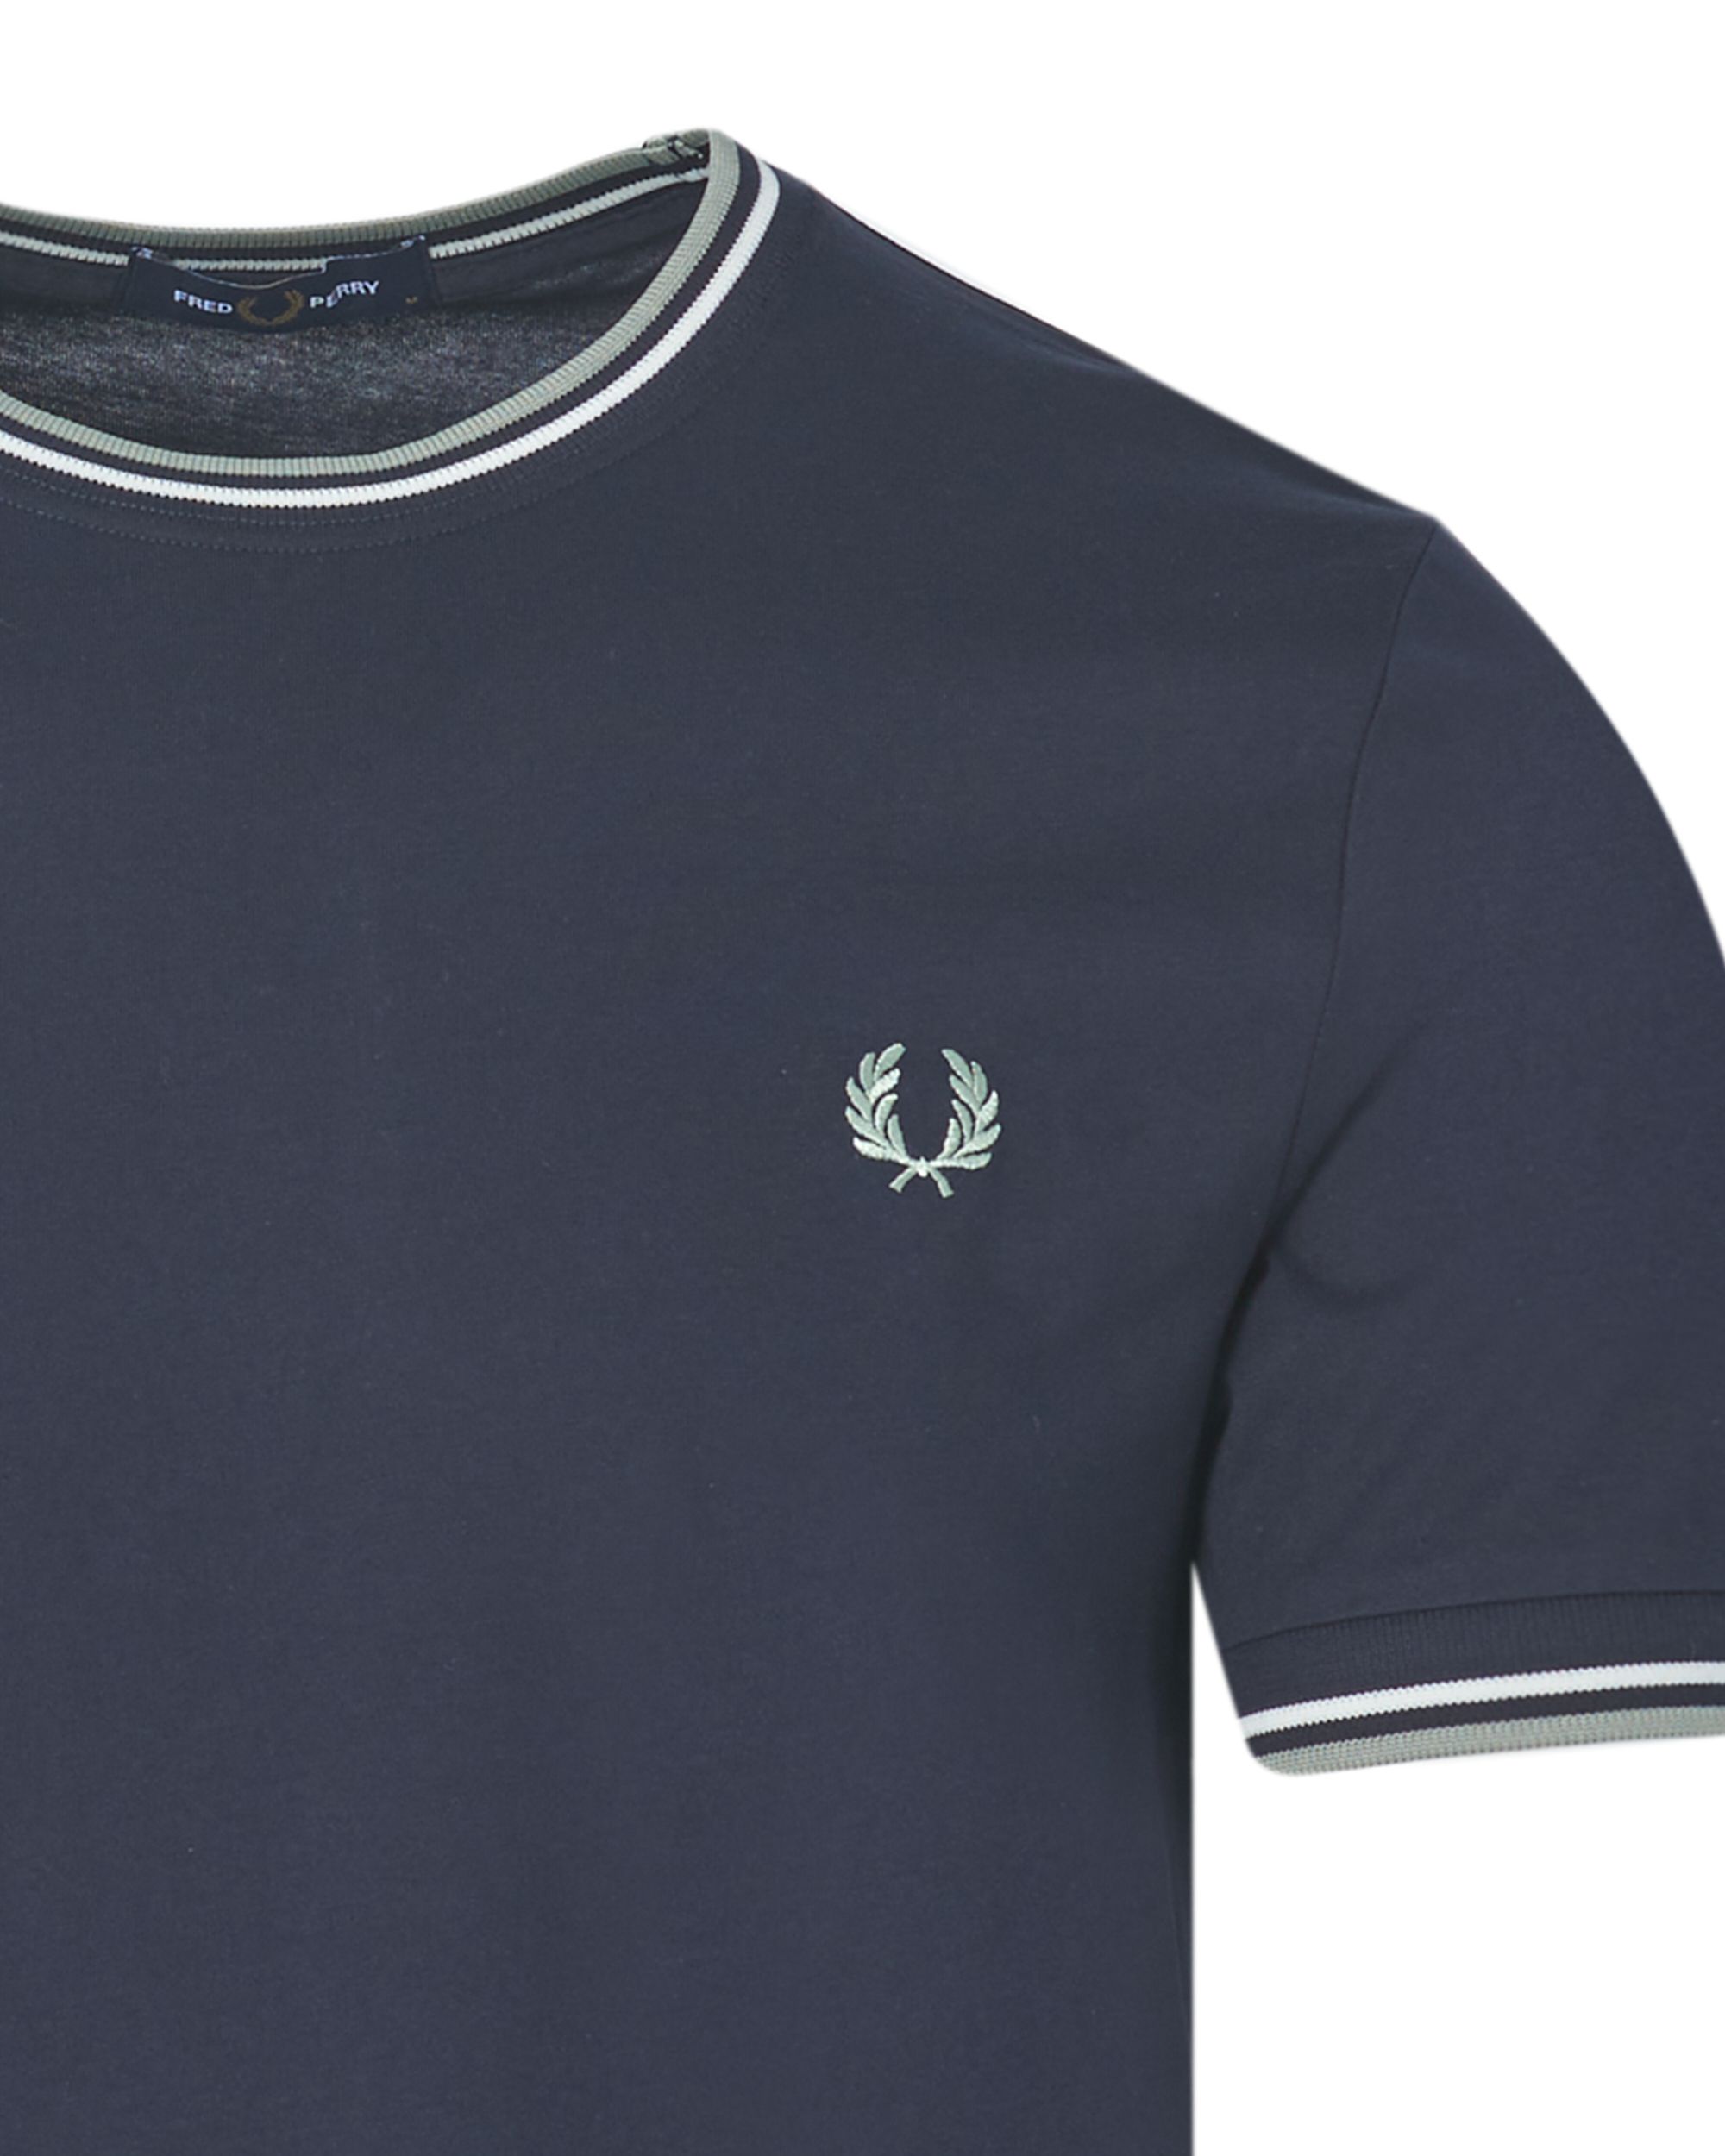 Fred Perry T-shirt KM Blauw 083514-001-L